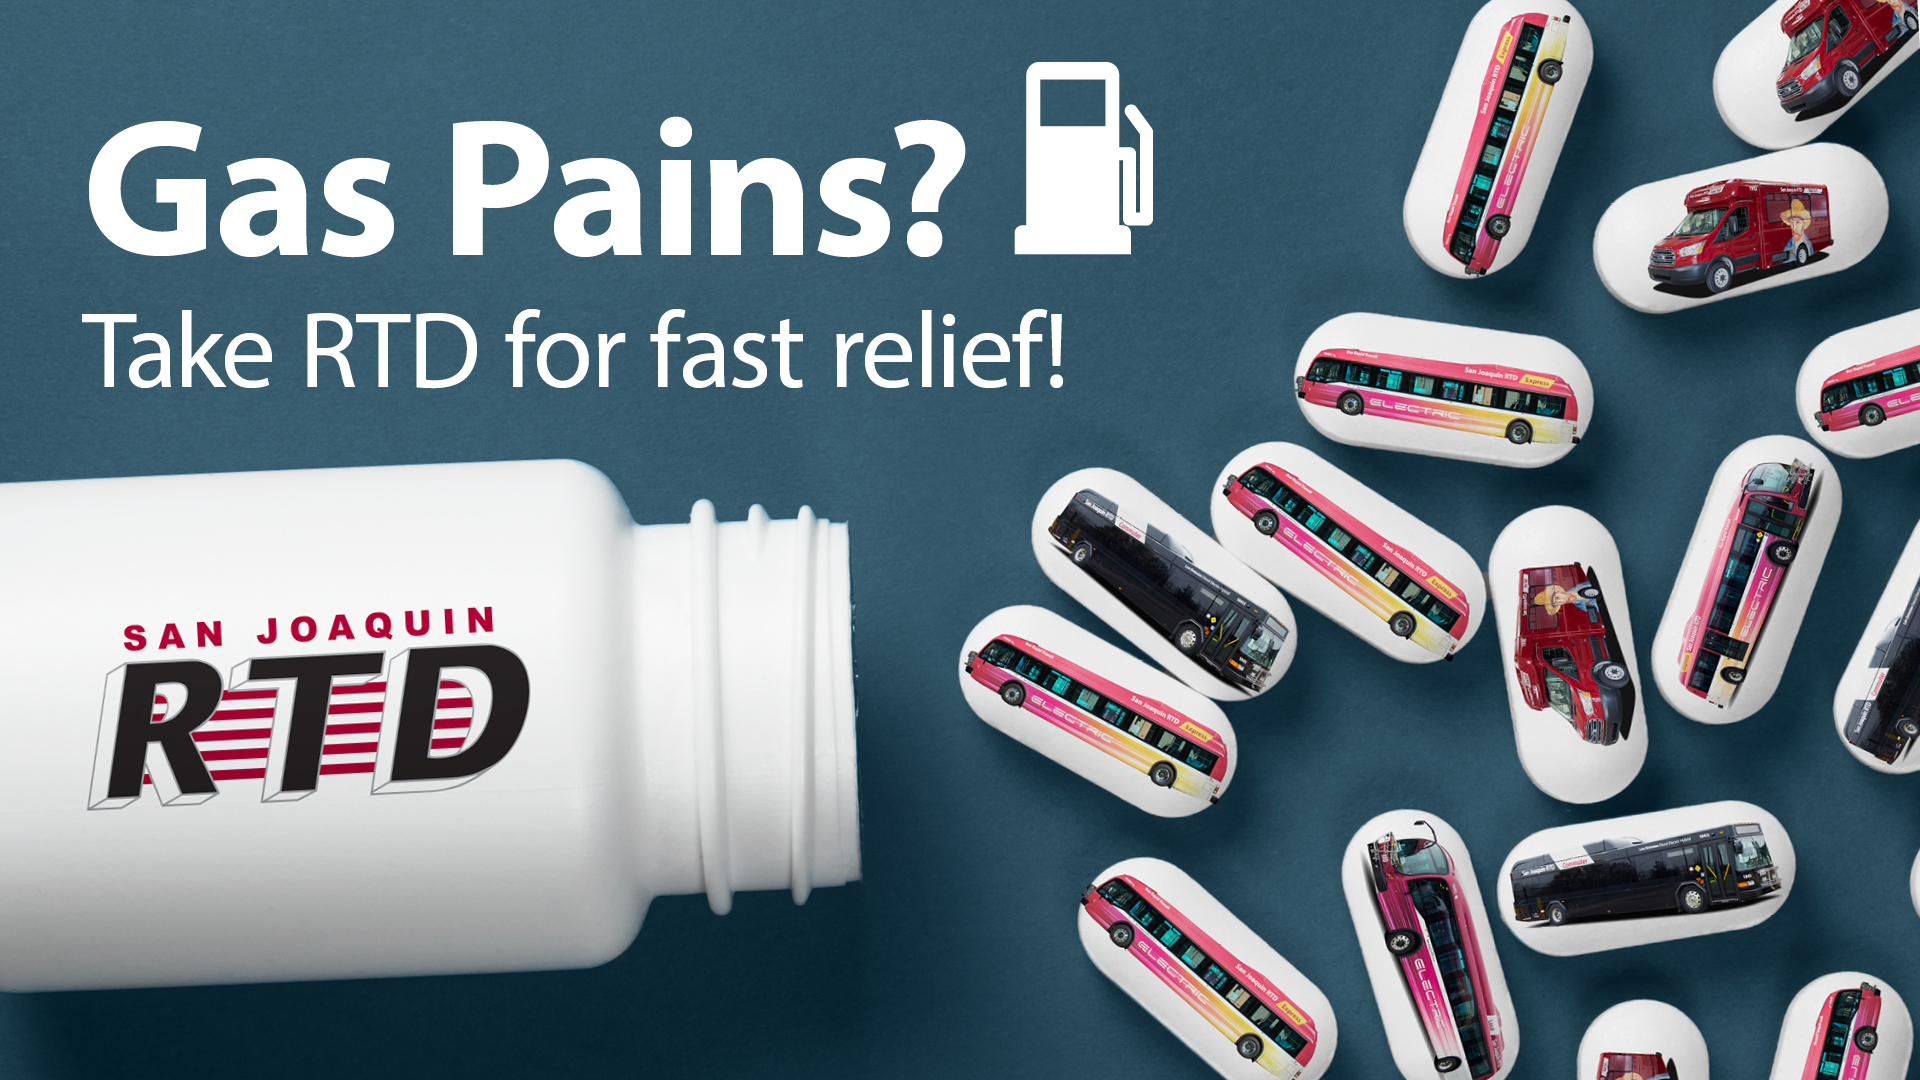 Gas pains? Take RTD for fast relief! Image of a pill bottle with the RTD logo imprinted on it. Image of while pills with RTD buses imprinted.